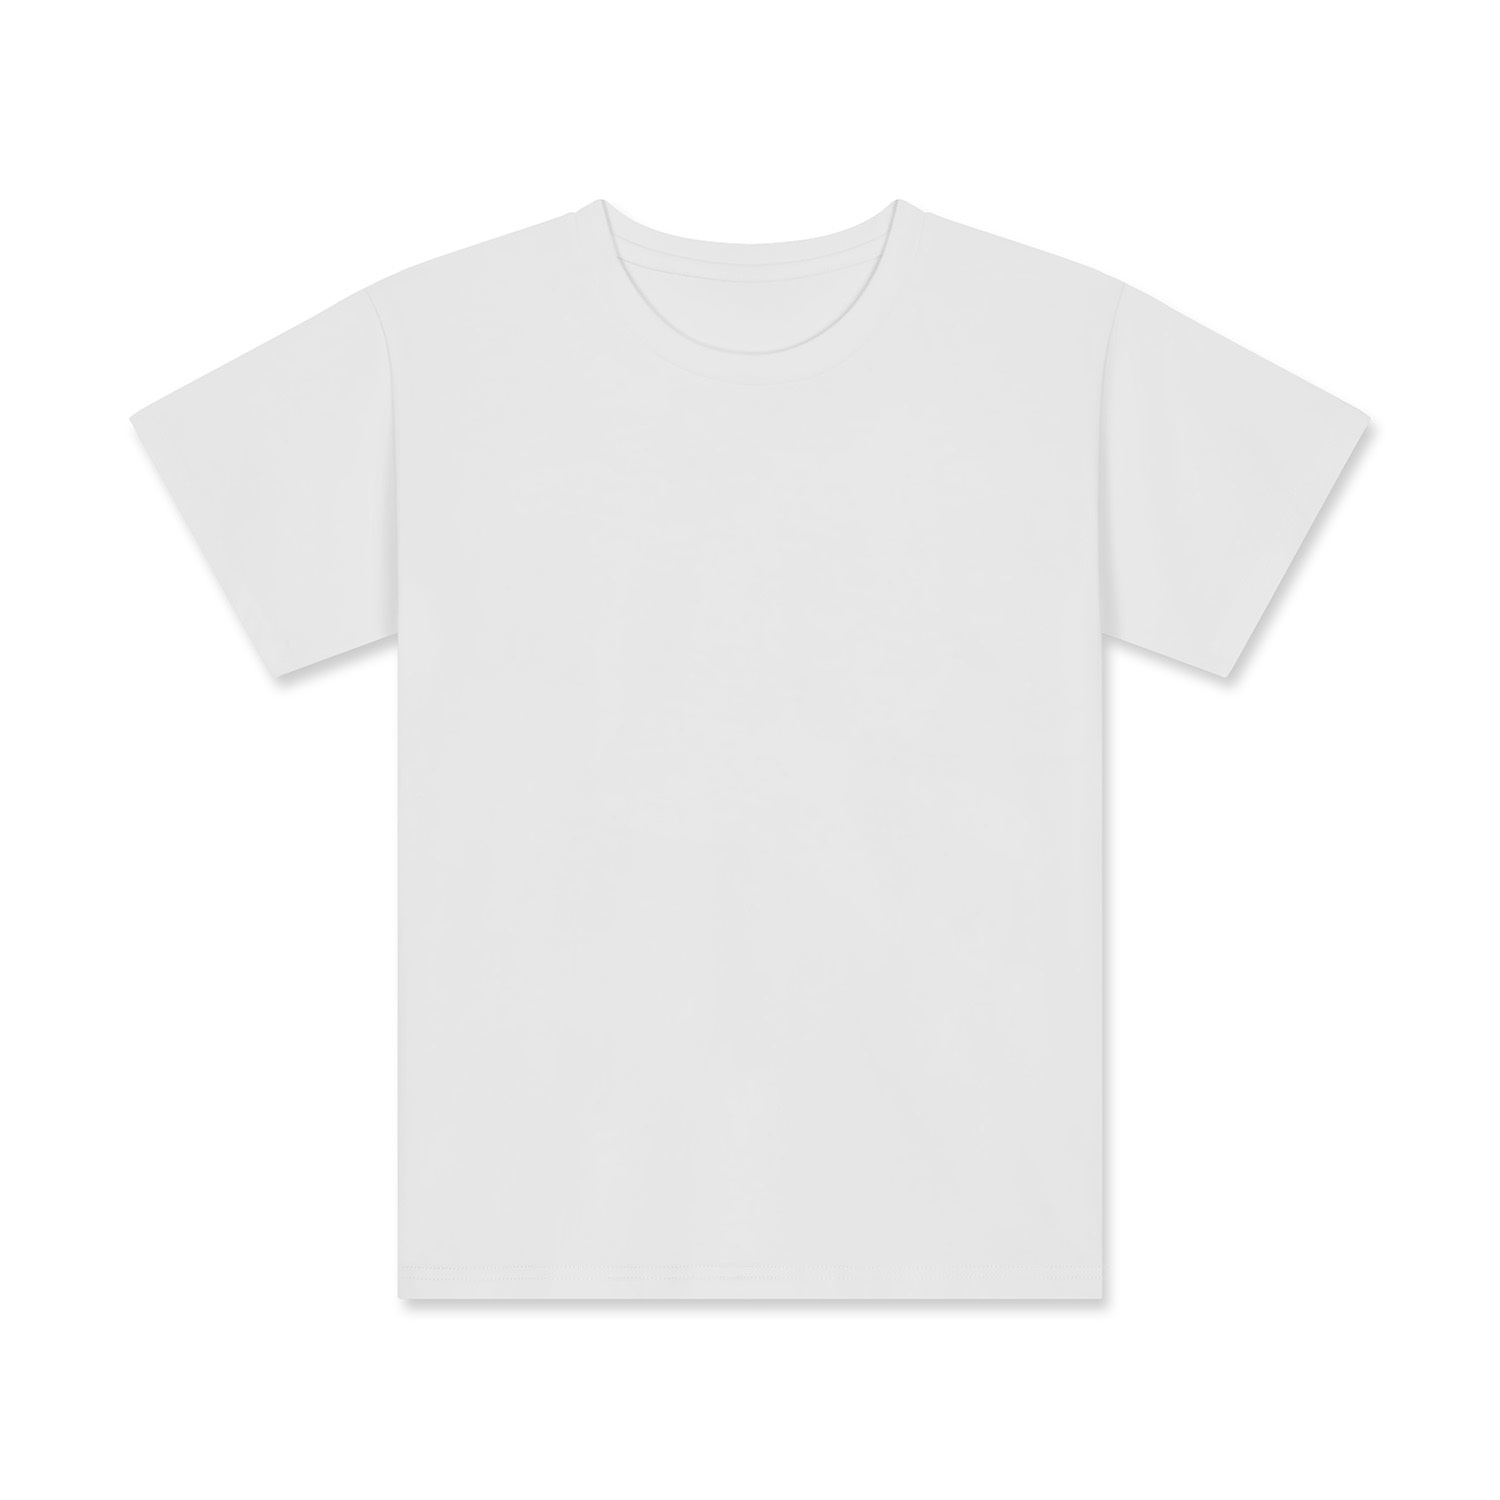 Shop Soft Cotton T-Shirts for Kids | High-Quality Cotton Tees-1